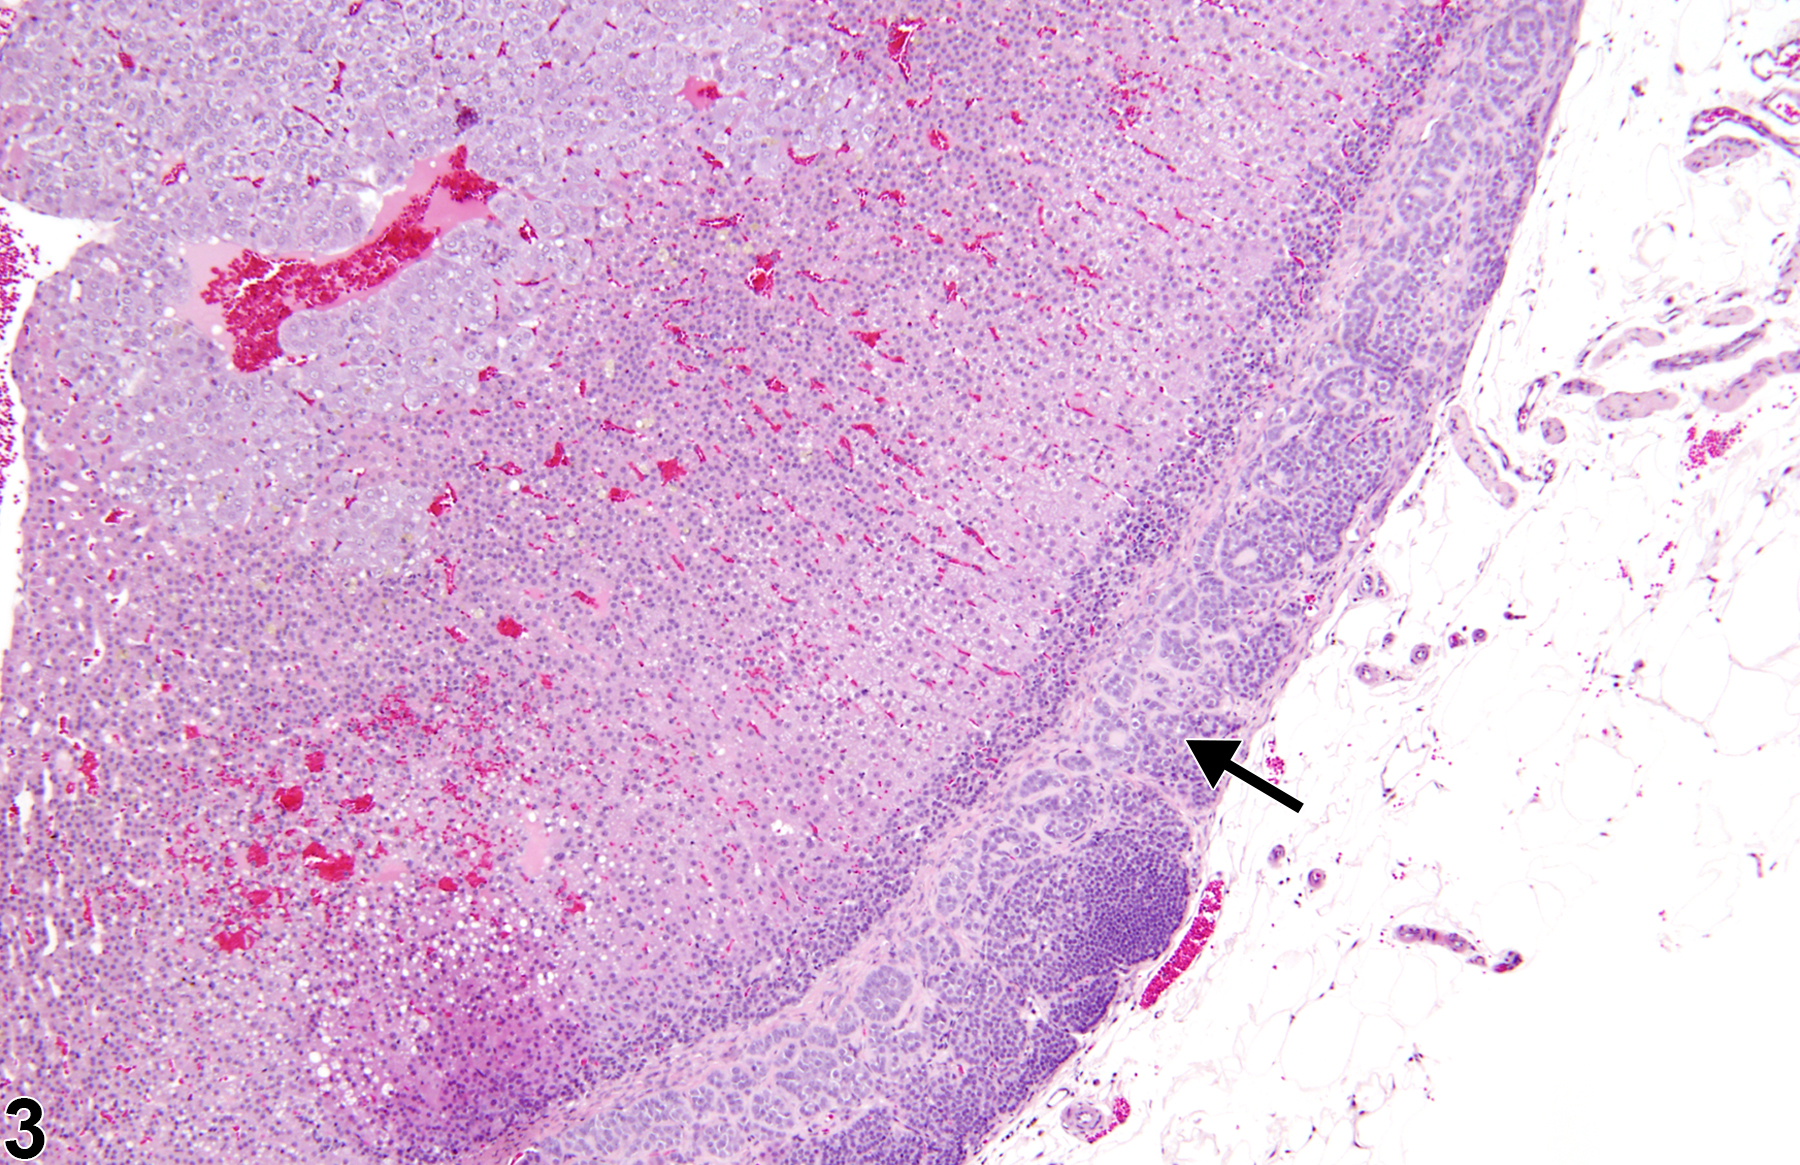 Image of accessory adrenocortical nodule in the adrenal gland from a male F344/N rat in a chronic study